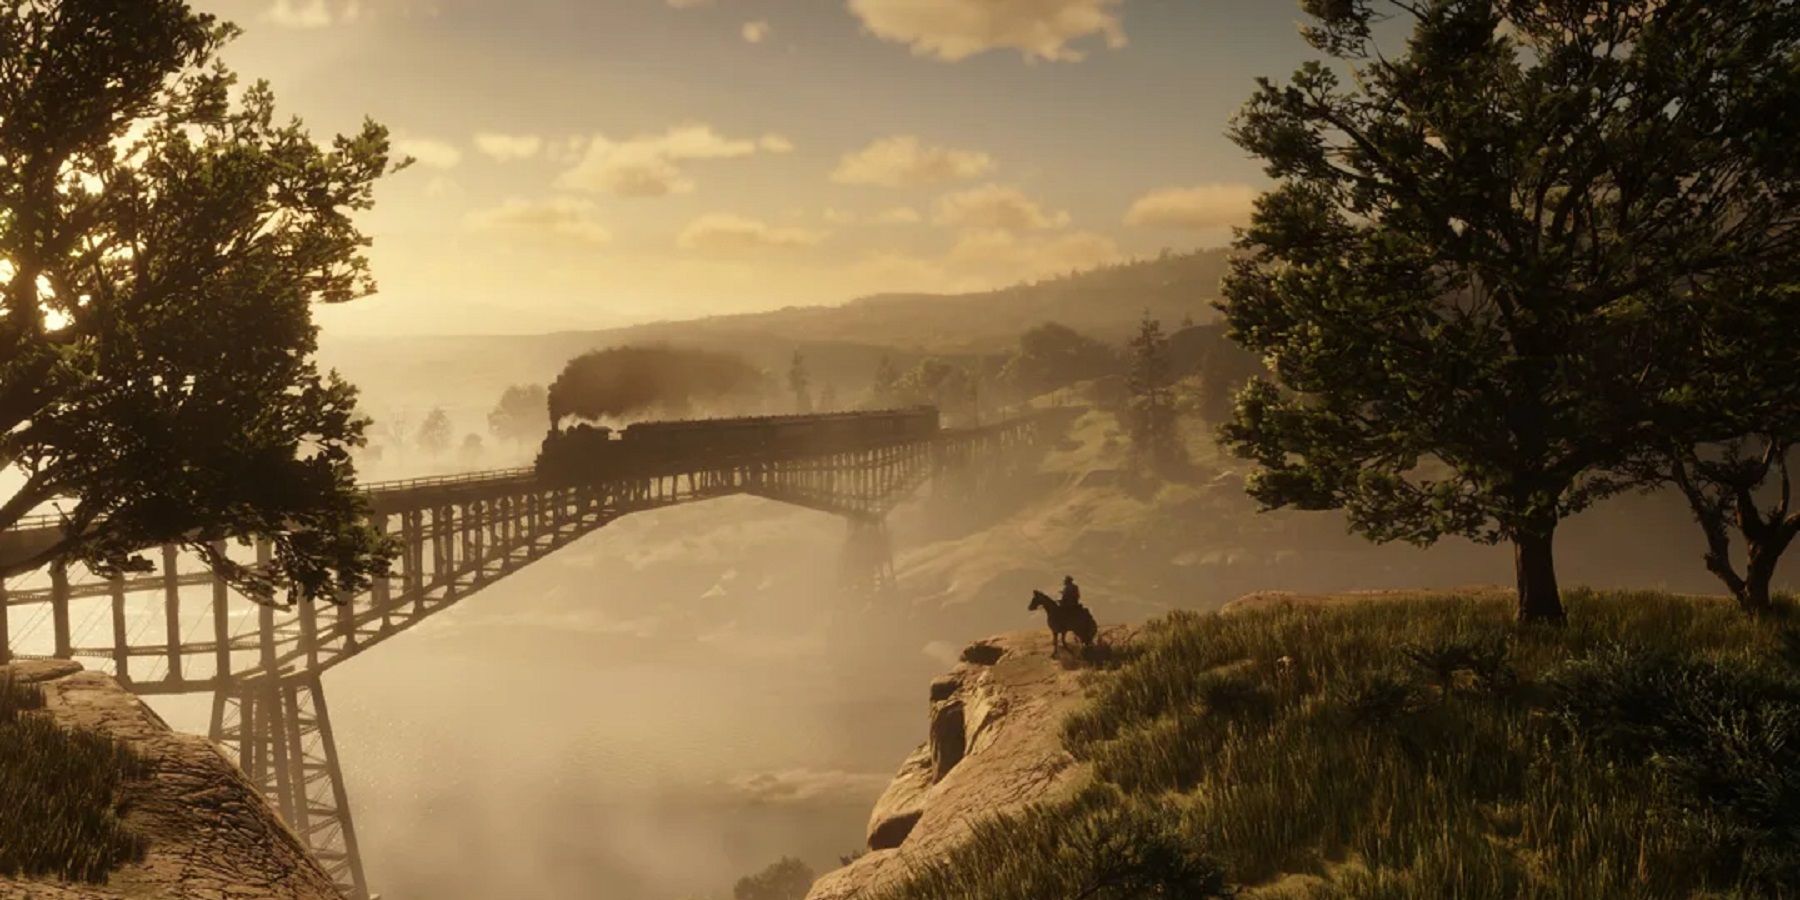 Red Dead Redemption 3 map concept is staggeringly detailed, and absolutely  massive